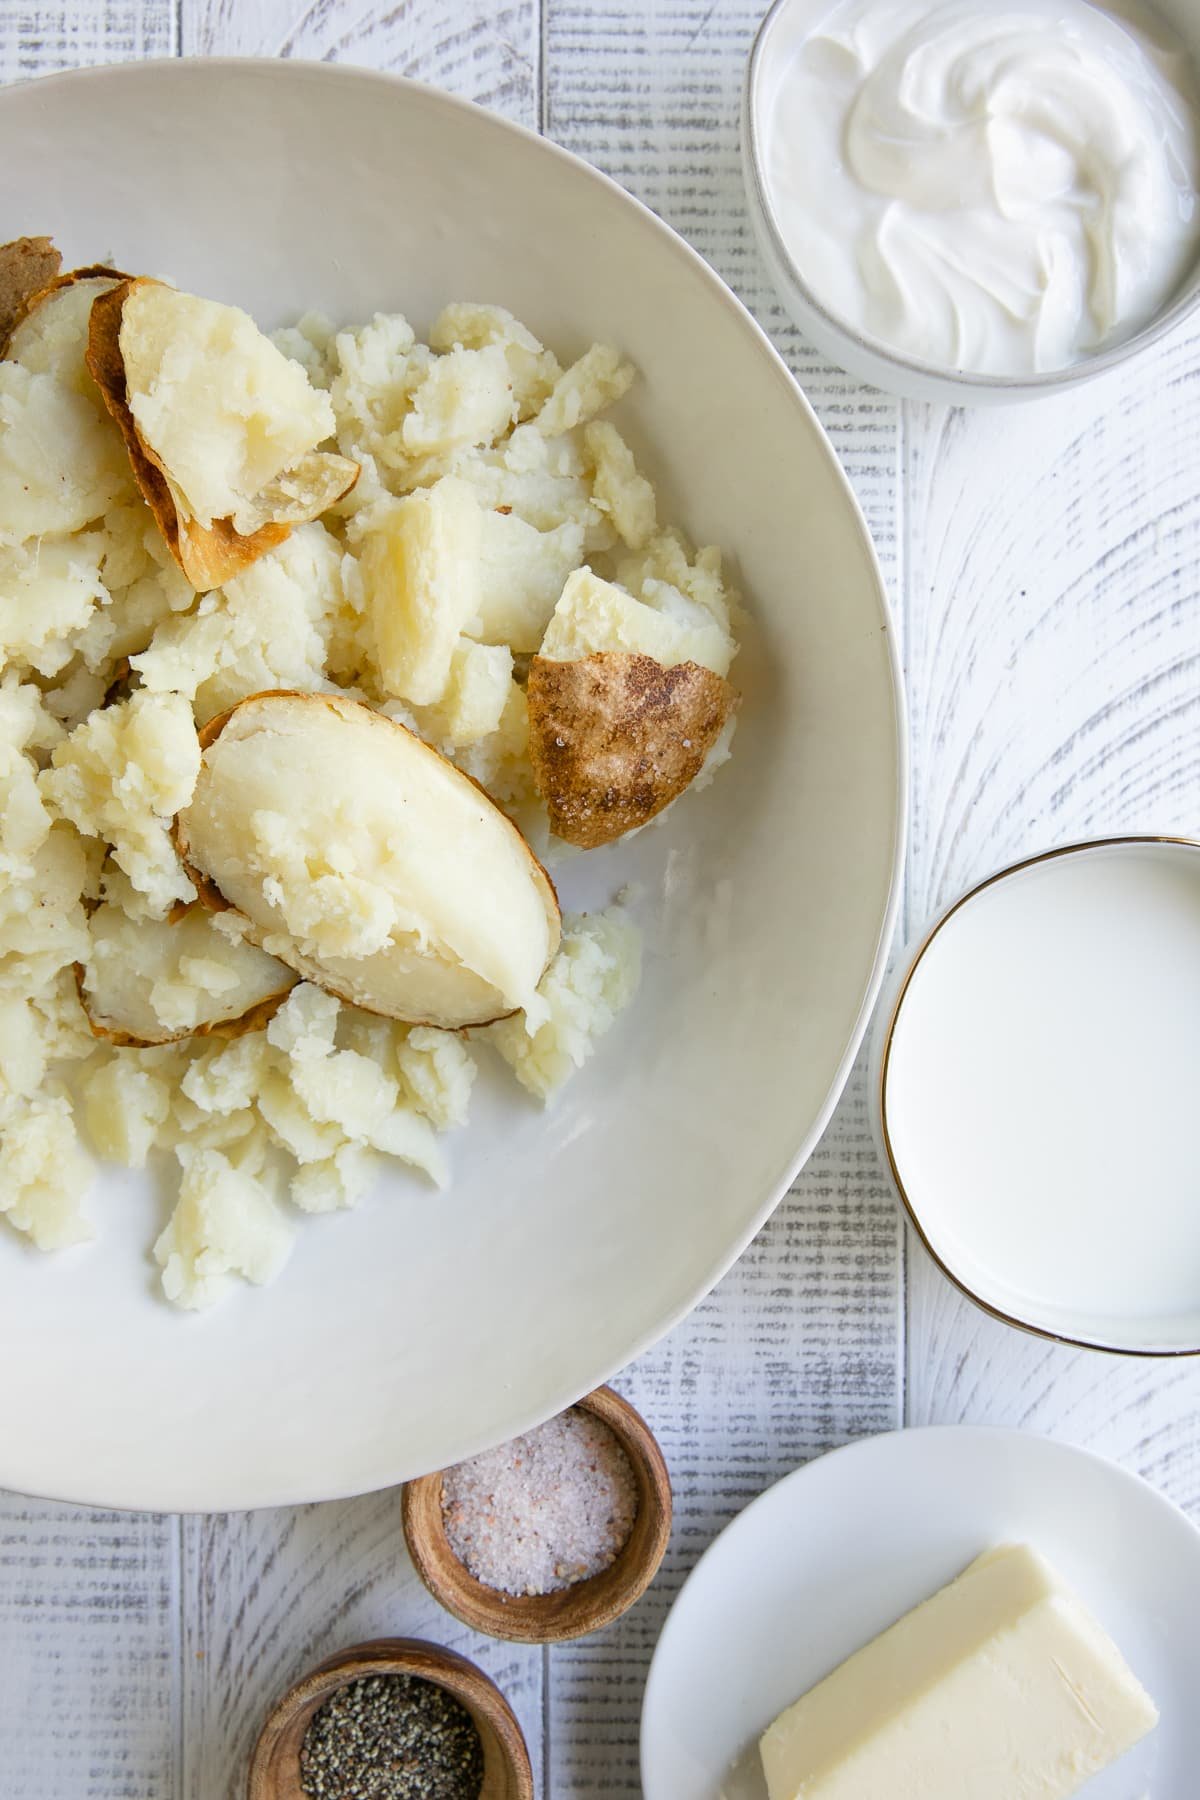 Large white bowl filled with the scooped out sides of baked potatoes and surrounded by side bowls of salt, pepper, sour cream, and milk.